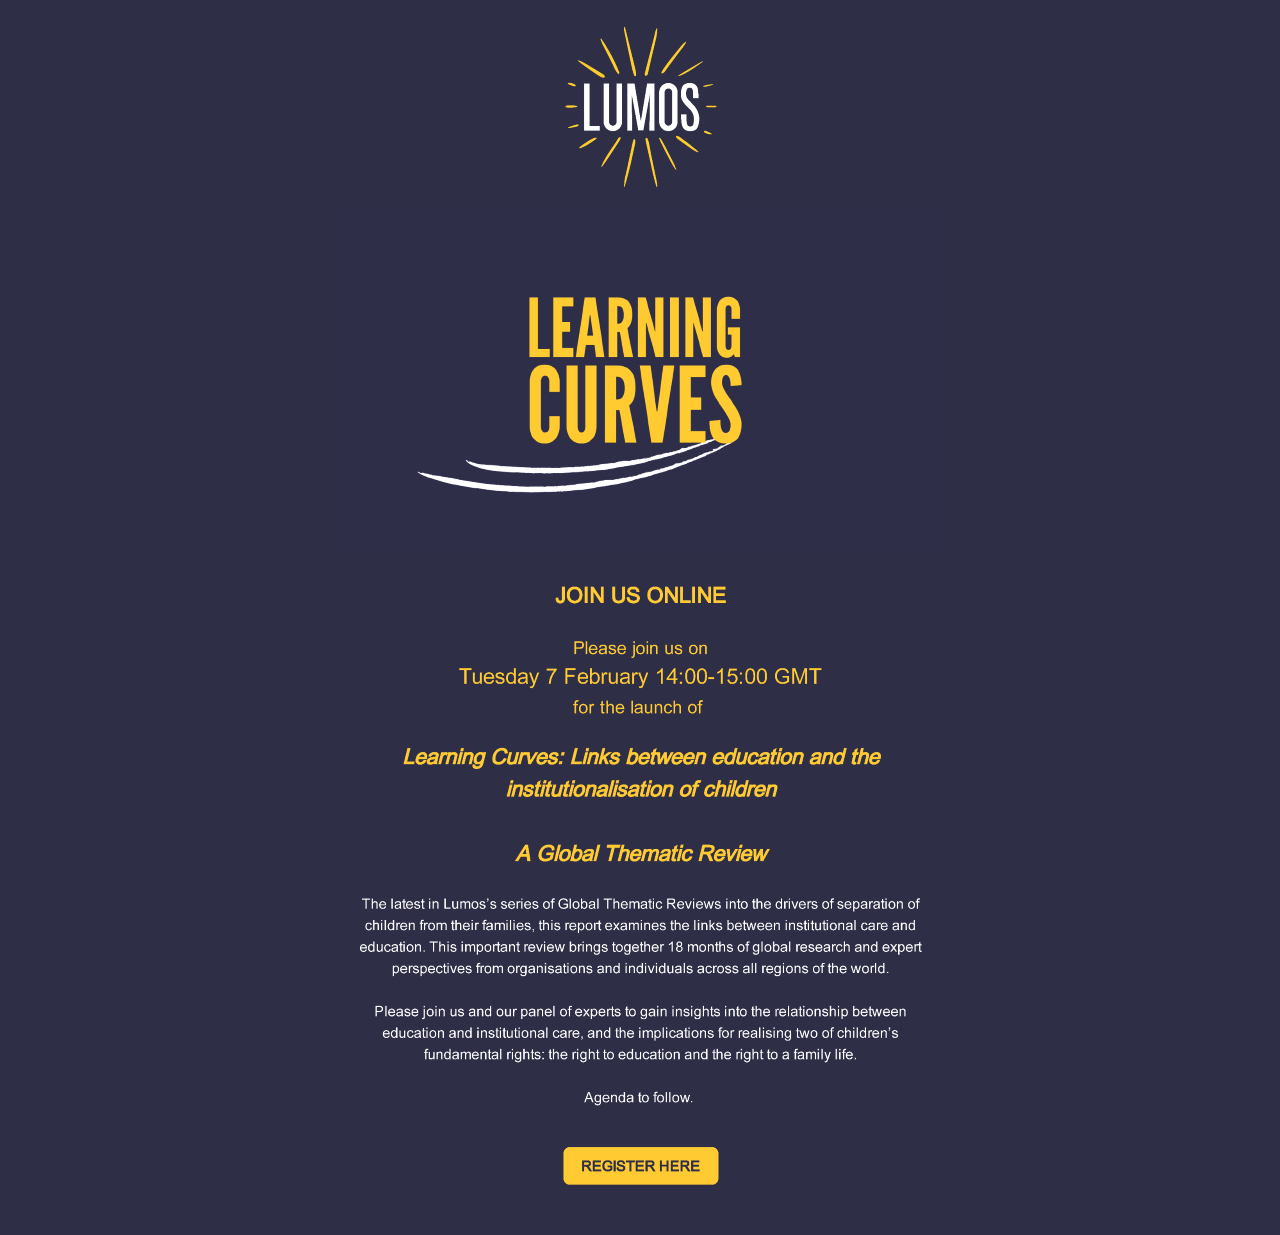 Lumos is delighted to invite you to the online launch of Learning curves, our latest Global Thematic Review about the links between education and the institutionalisation of children on 7 February 2023 at 14:00 GMT. 